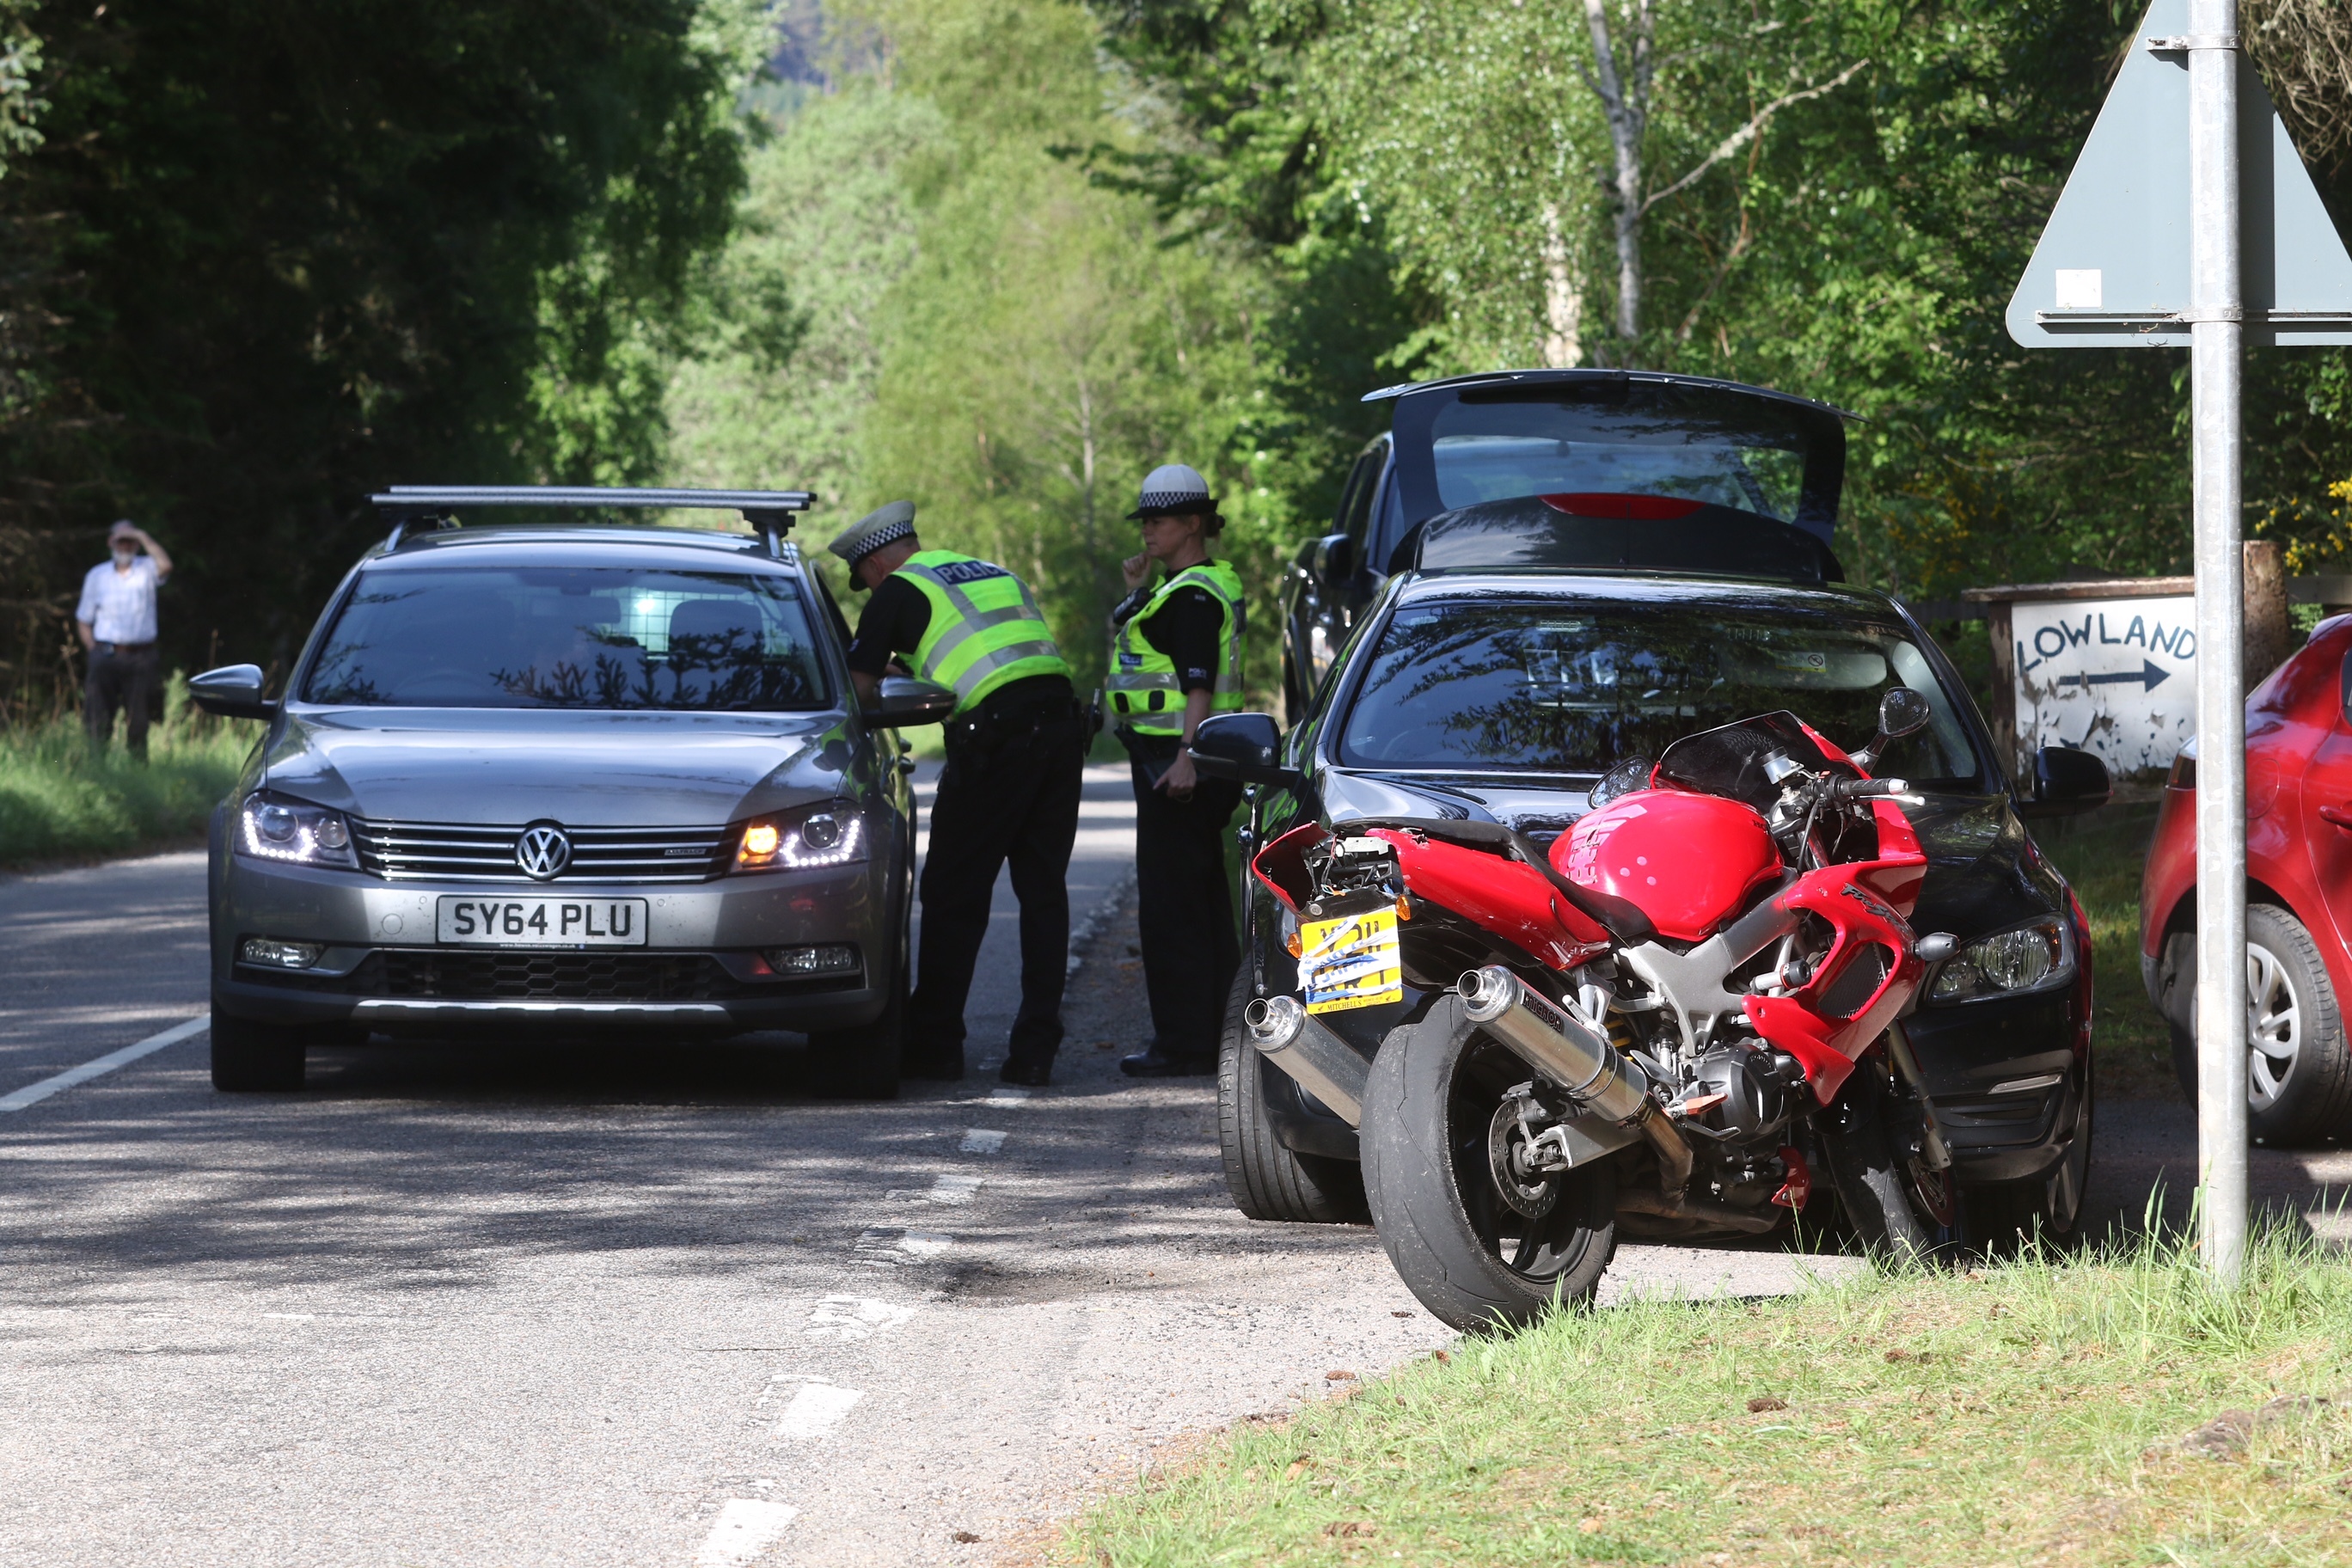 The motorcycle involved in the accident on the A831